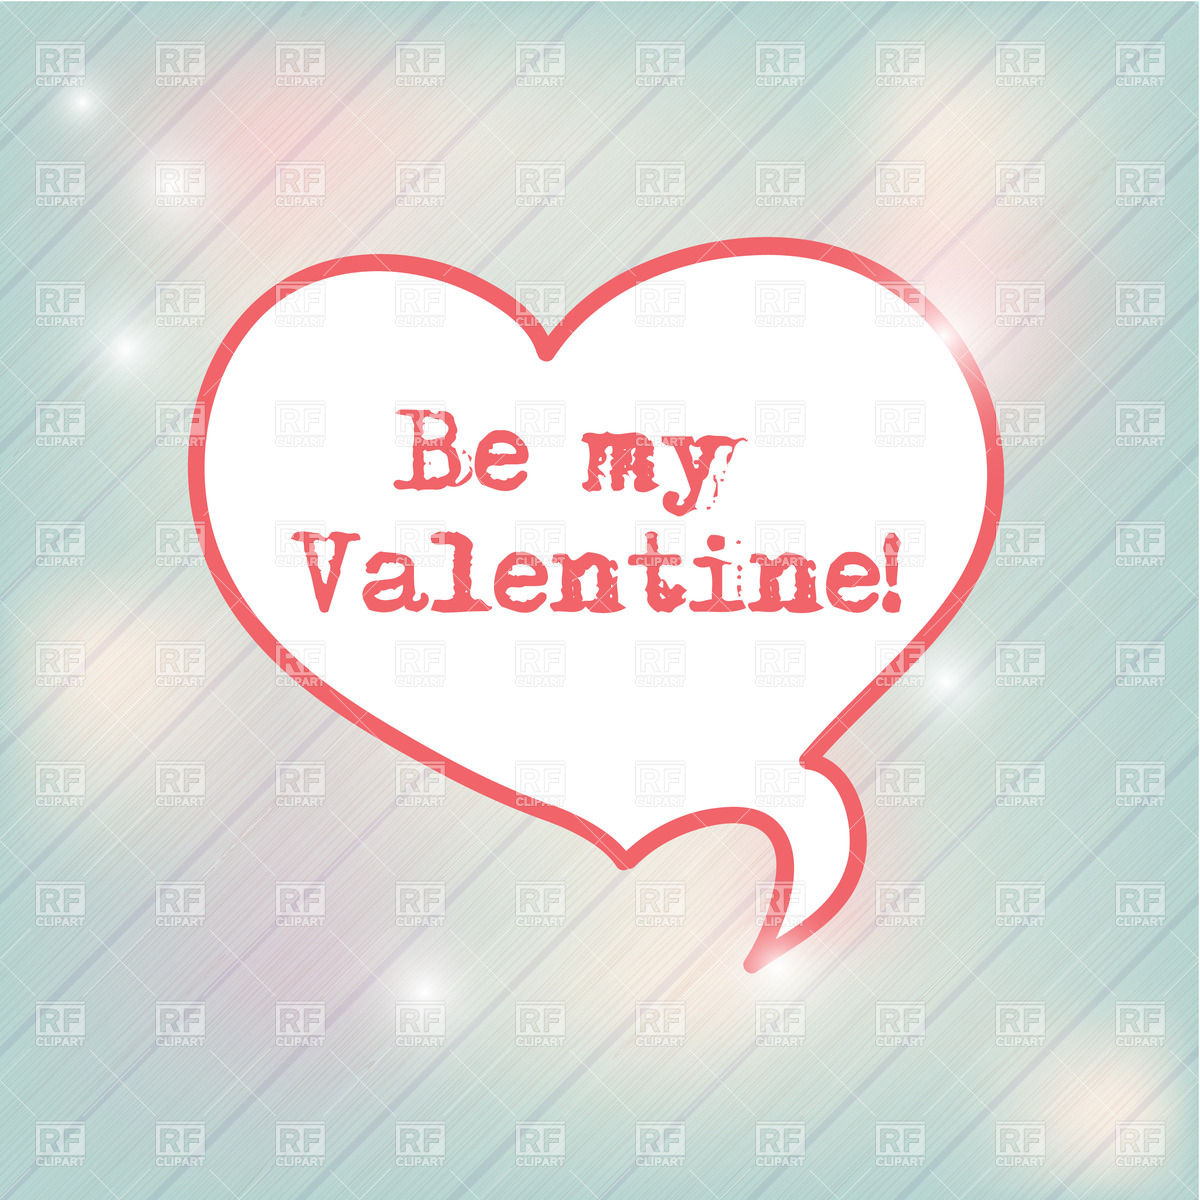 Be My Valentine   Greeting Card With Speech Bubble Heart Download